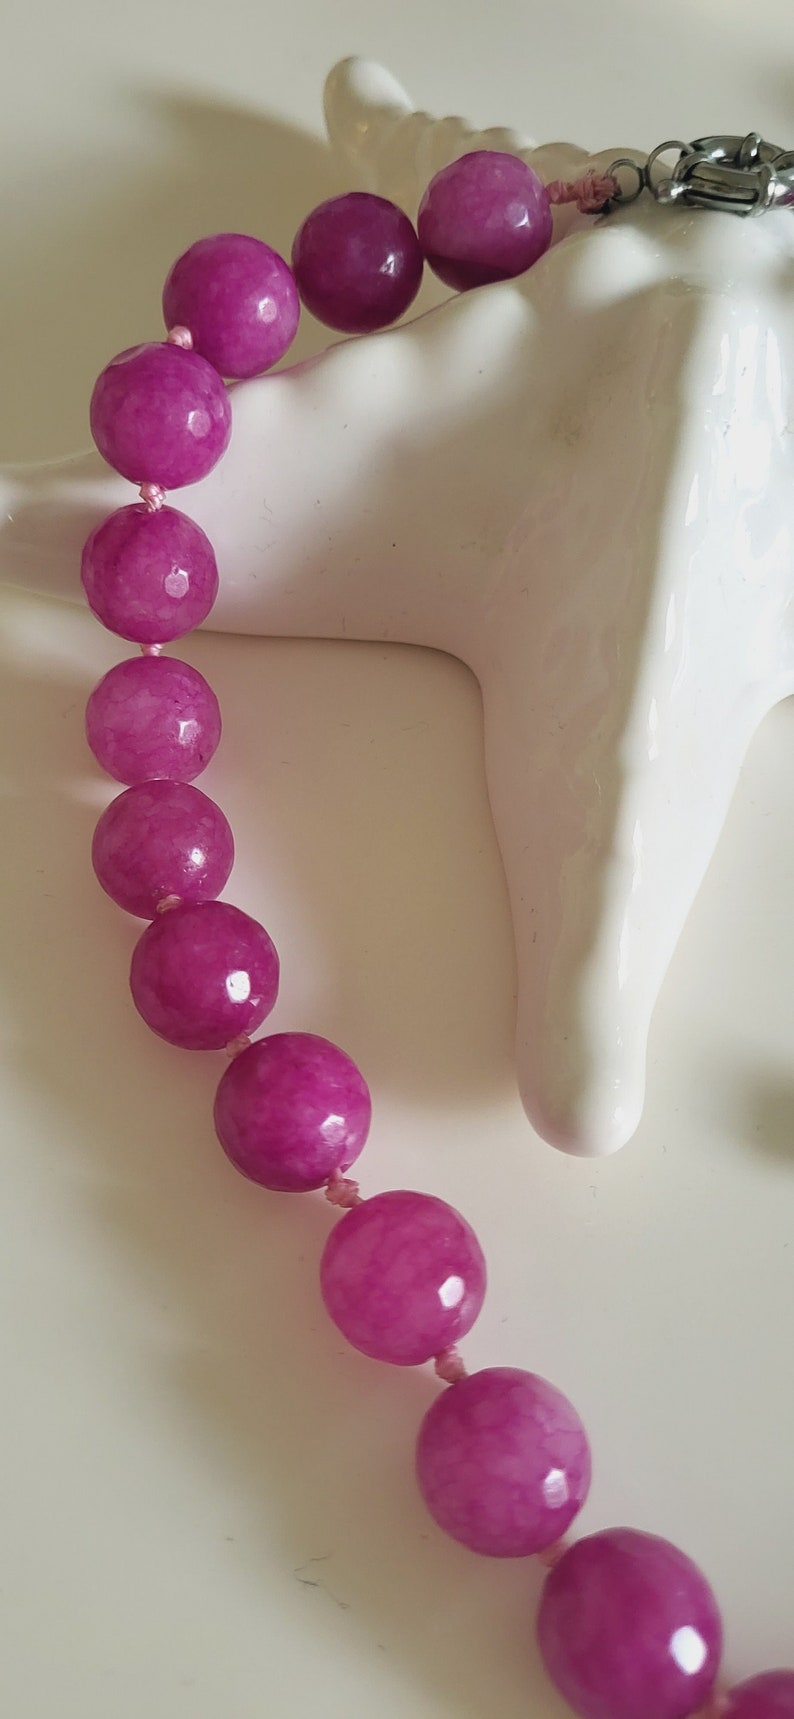 Pink agates necklace for women, necklace with precious natural stone beads, women's jewelry for weddings and communions, handmade jewelry image 9